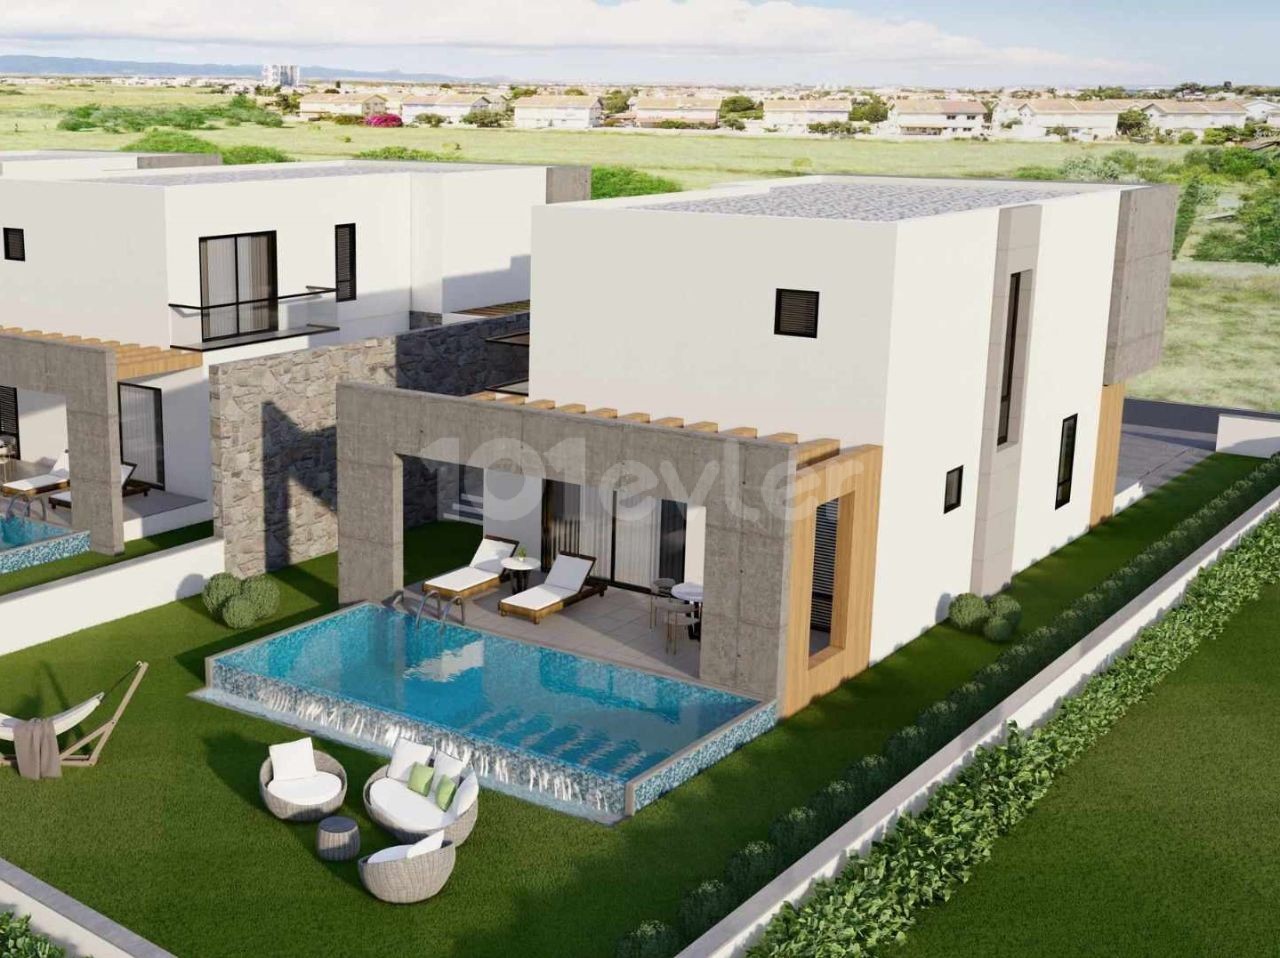 Iskele Longbeach Area Villas With/Without Pool Within Walking Distance To The Sea